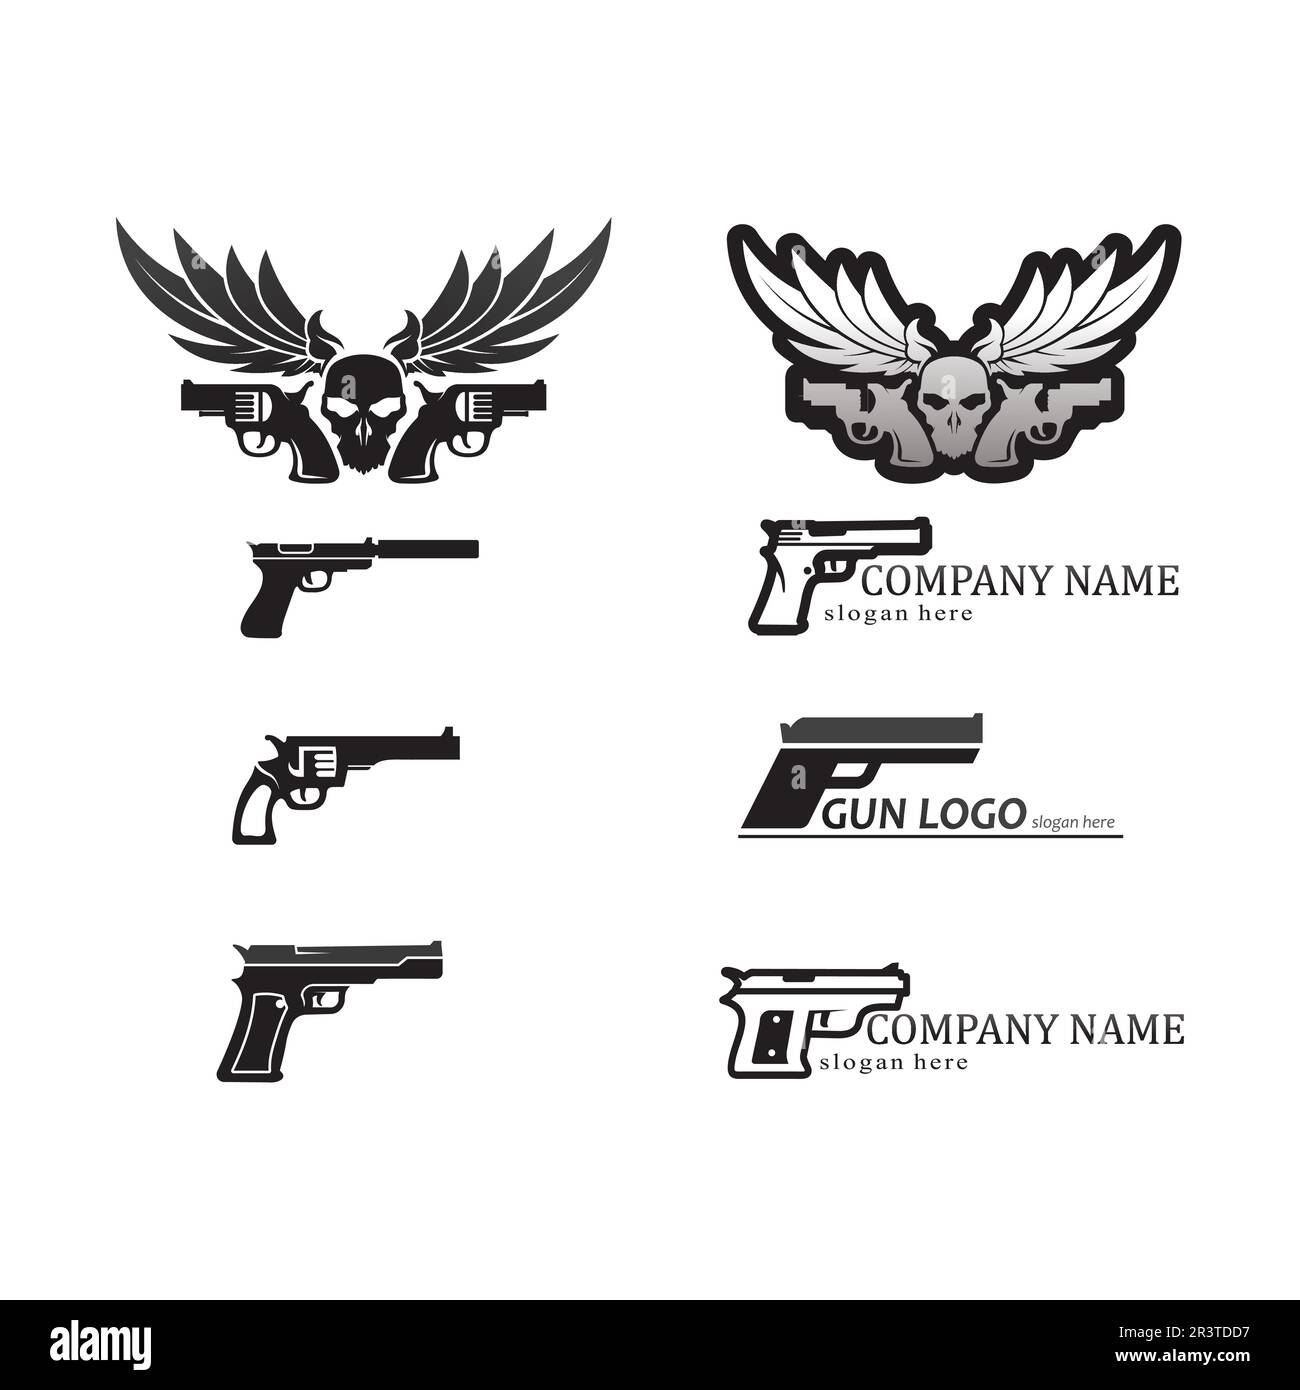 gun camou flage military repeats seamless army illustration Stock Vector